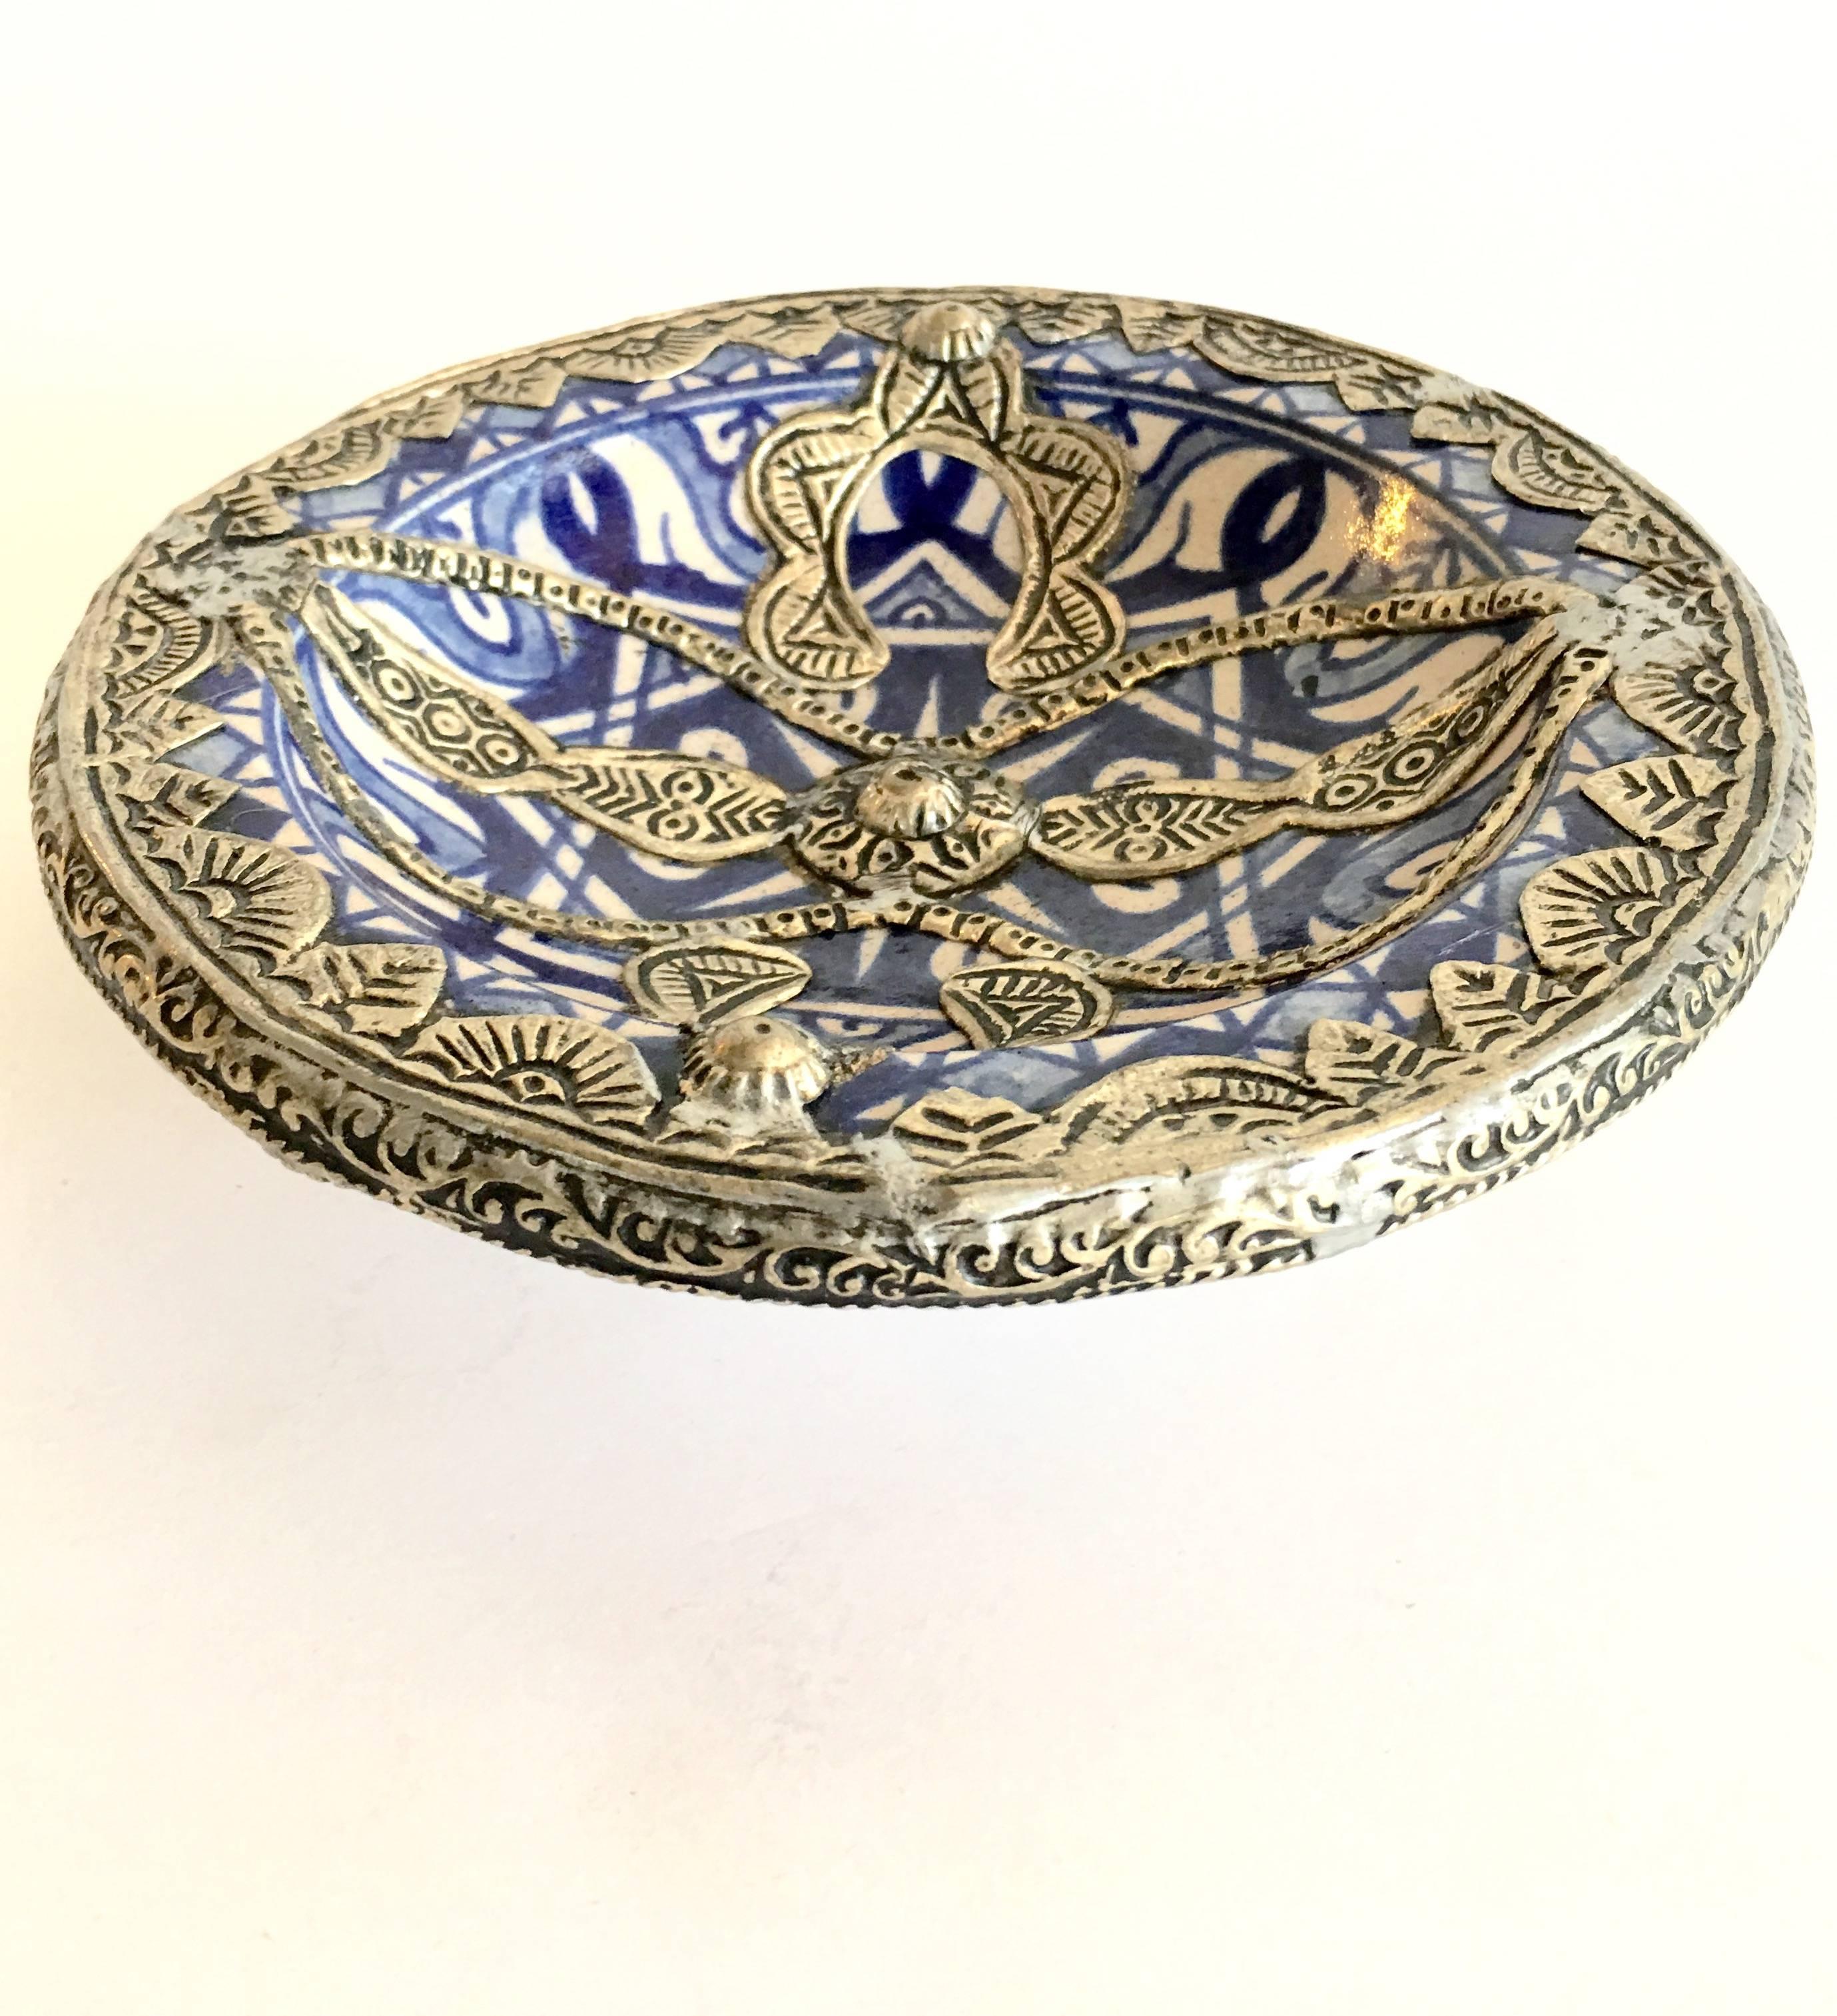 Morocco Fez blue and white silver nickel overlay ceramic hand-painted plate, signed on the underside, FES.